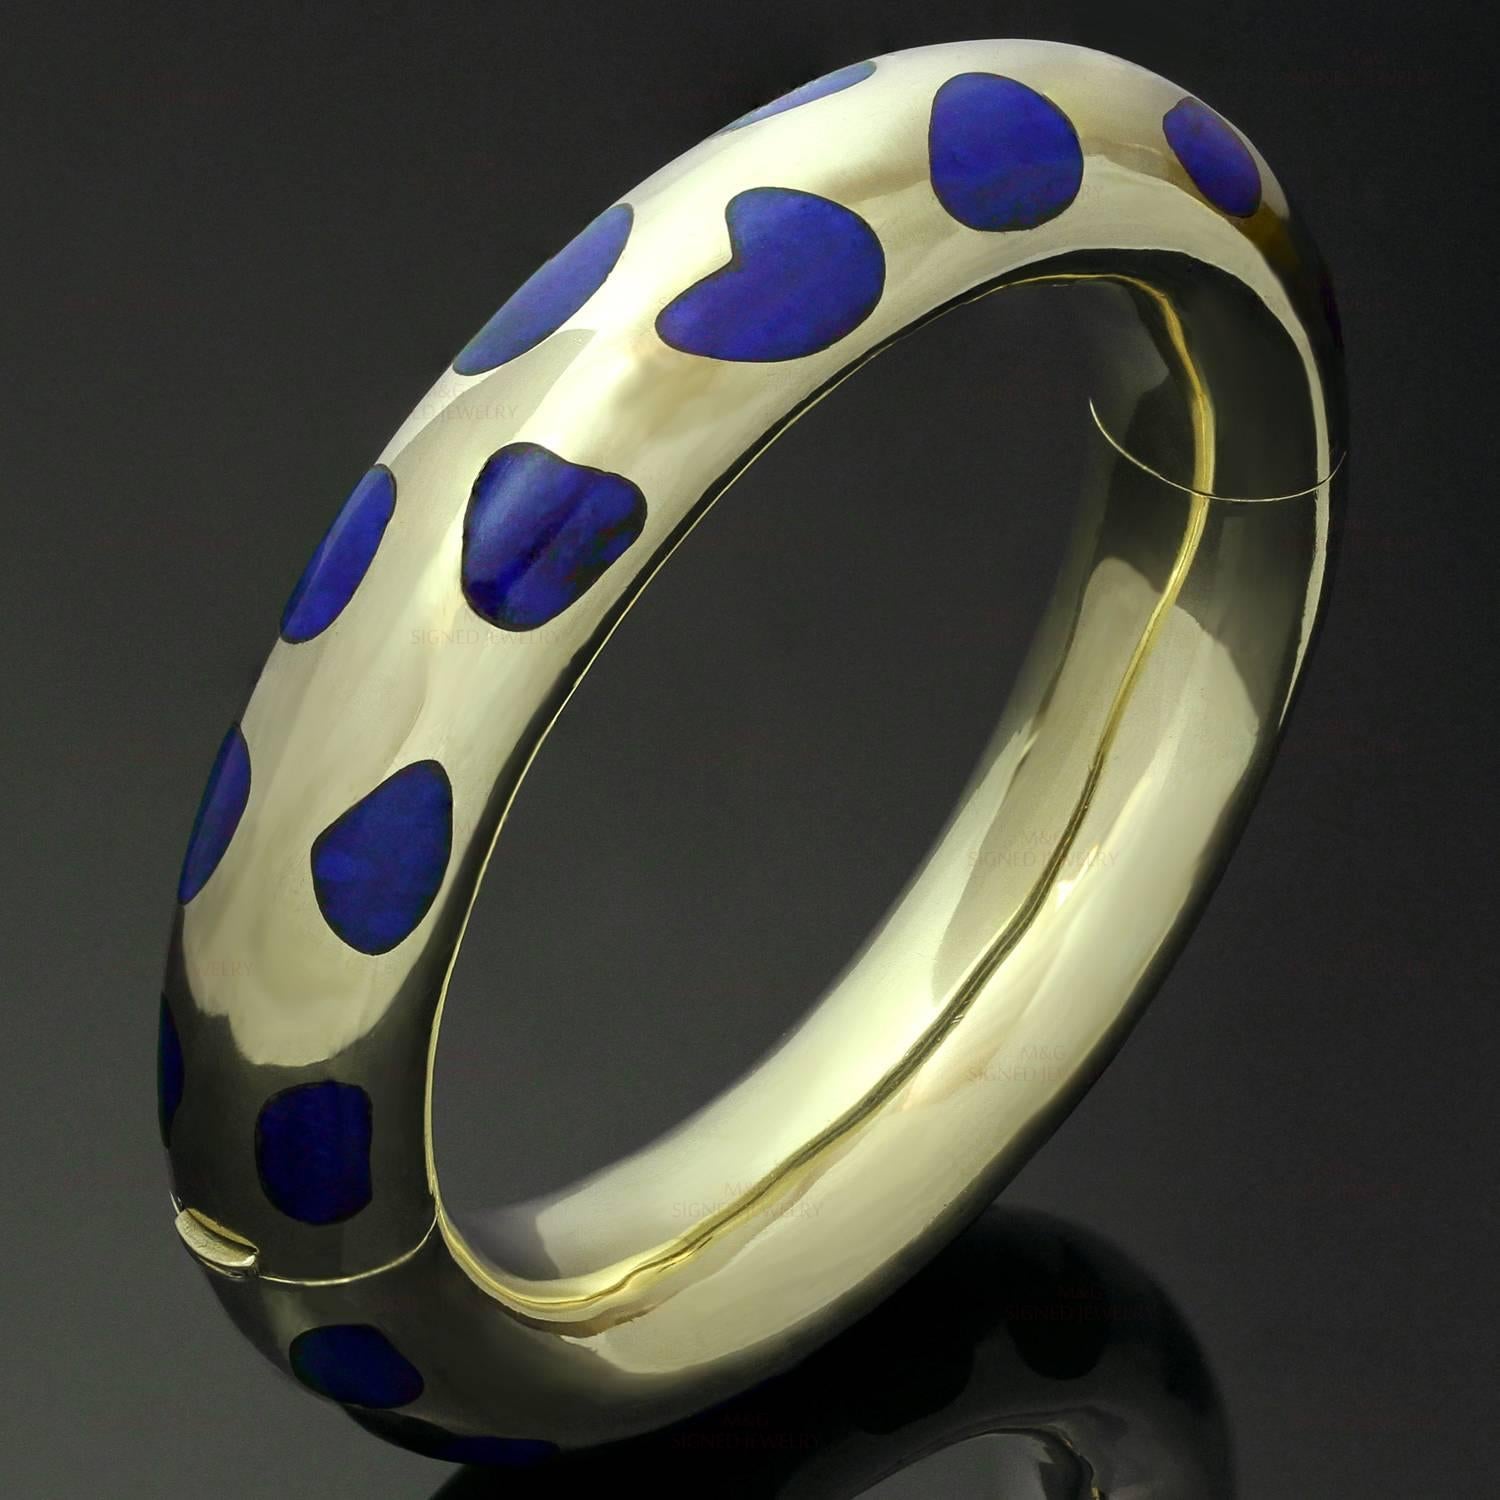 This fabulous Tiffany & Co. bracelet designed by Angela Cummings is crafted in 18k yellow gold and features chic fluid shapes inlaid with lapis lazuli. This bangle was made in United States circa 1980s. Measurements: 0.59" (15mm) width,